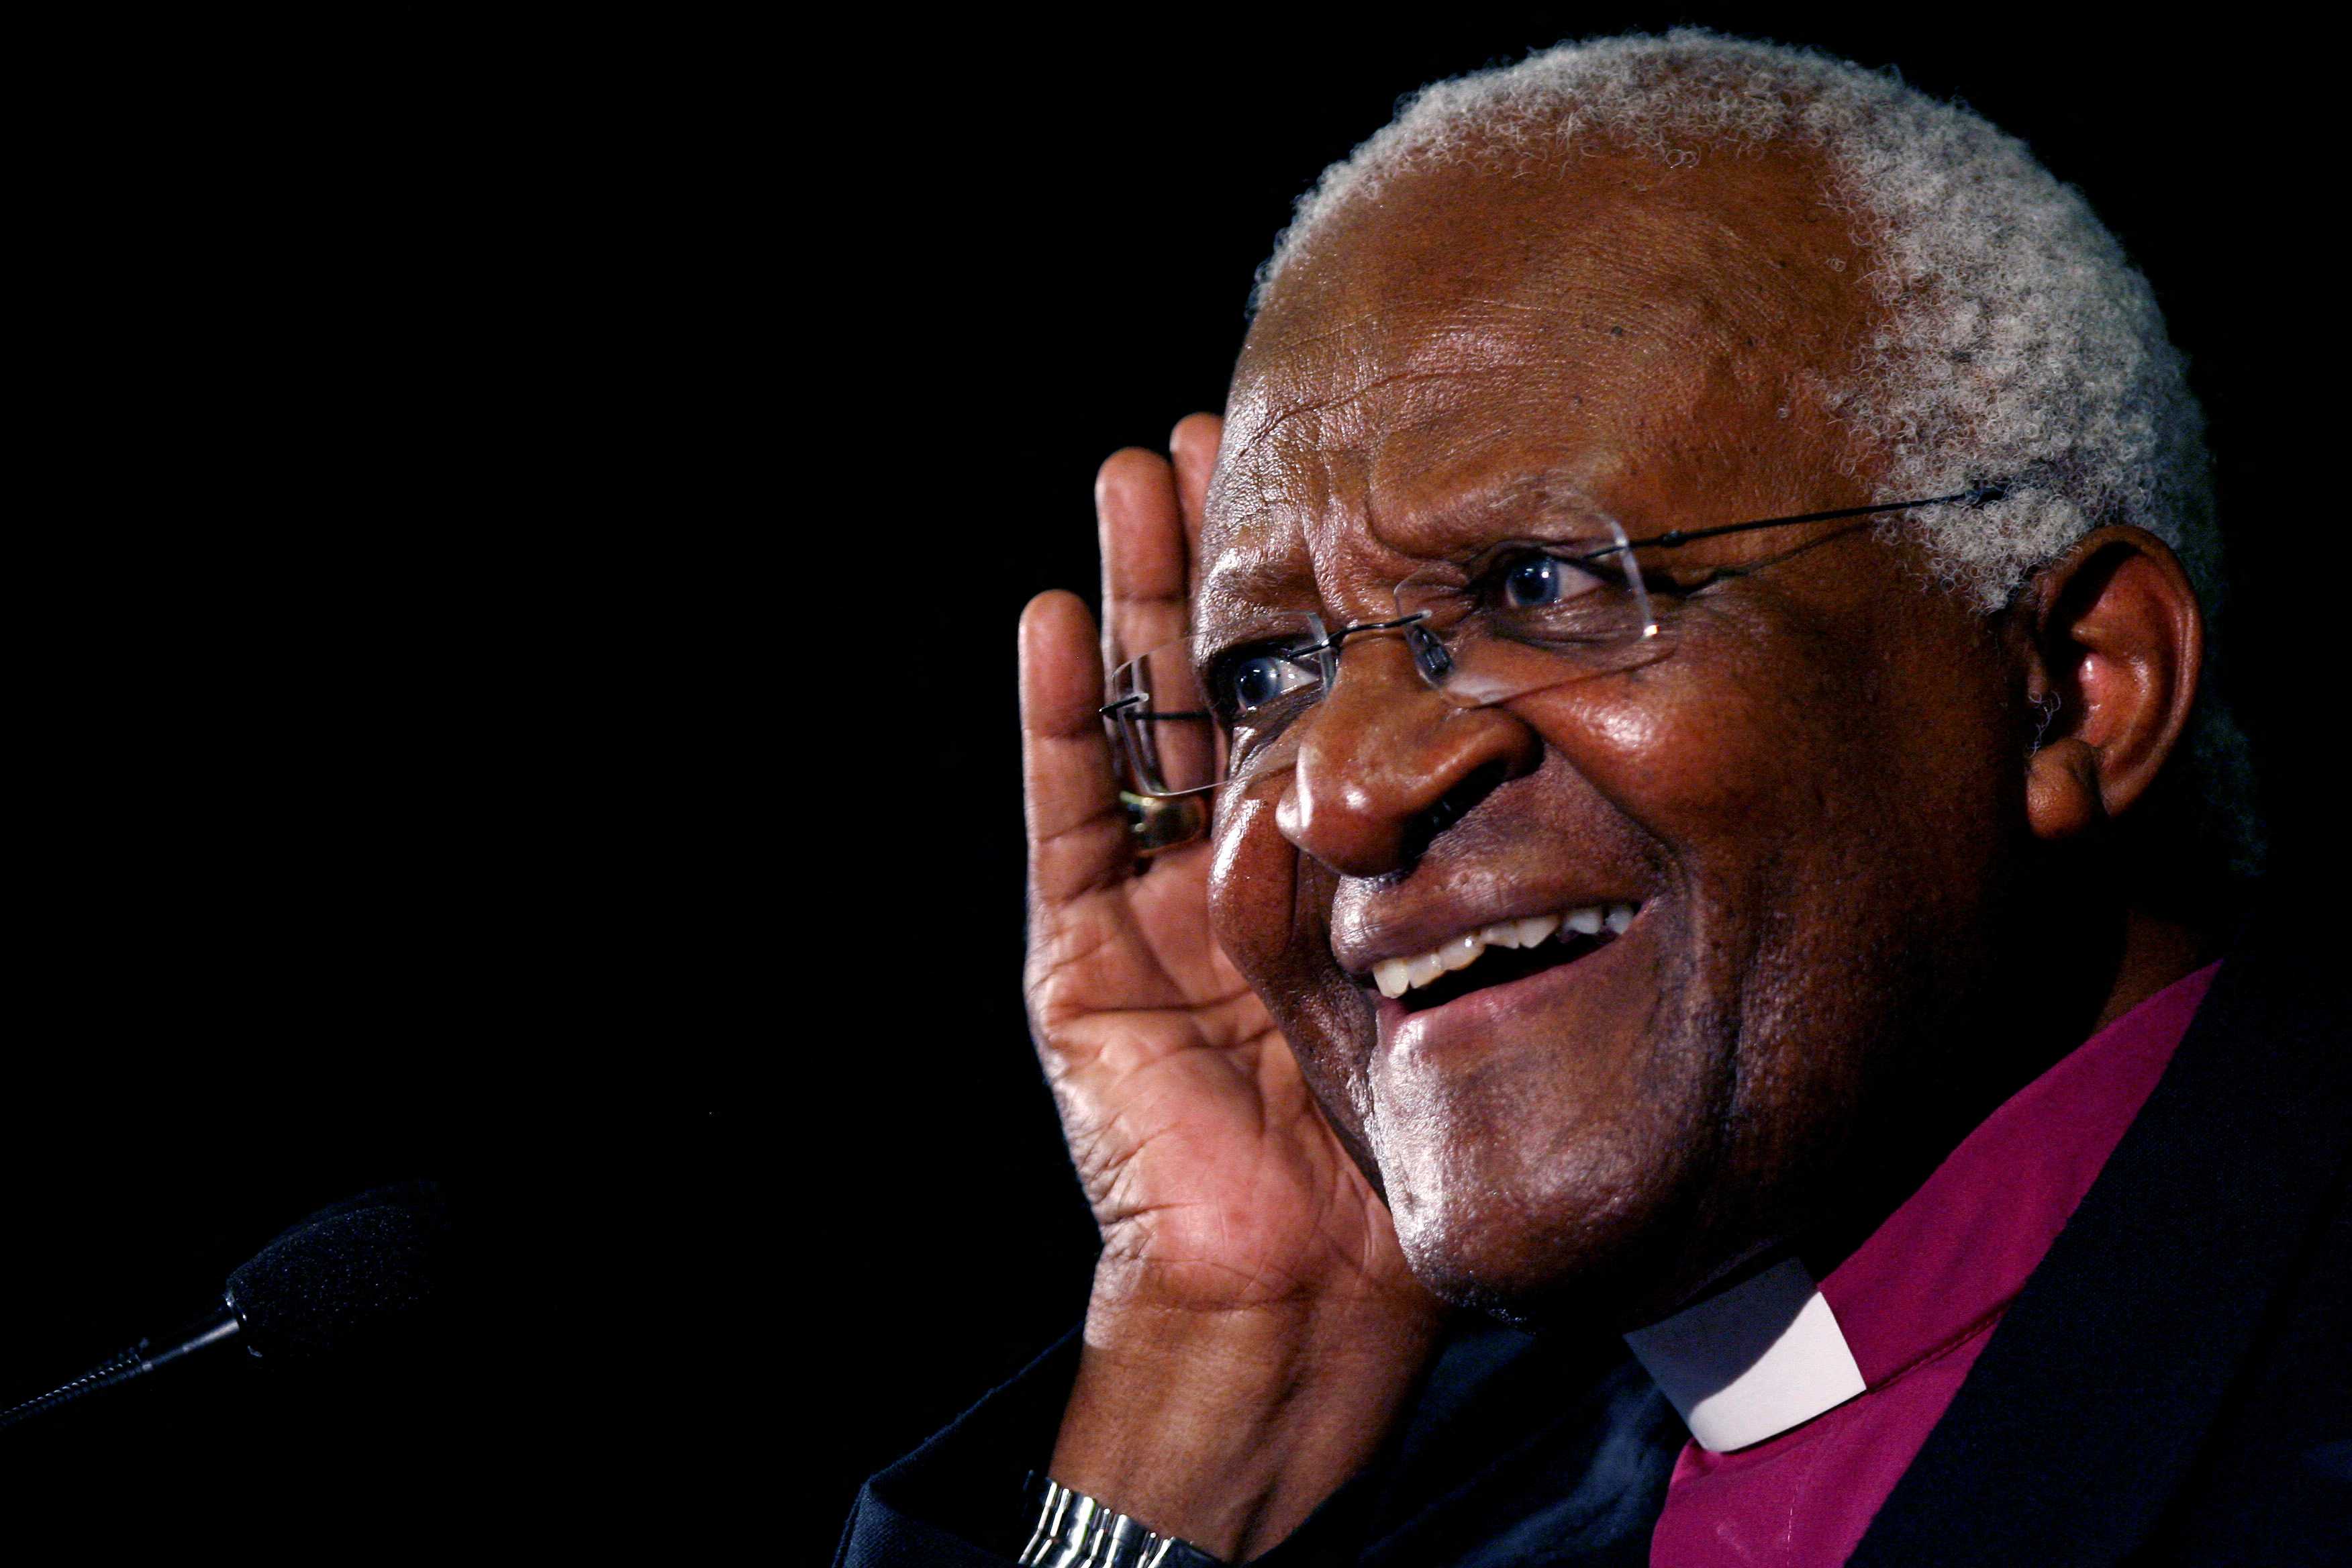 Archbishop Desmond Tutu gestures at the launch of a human rights campaign marking the 60th anniversary of the signing of the Universal Declaration of Human Rights